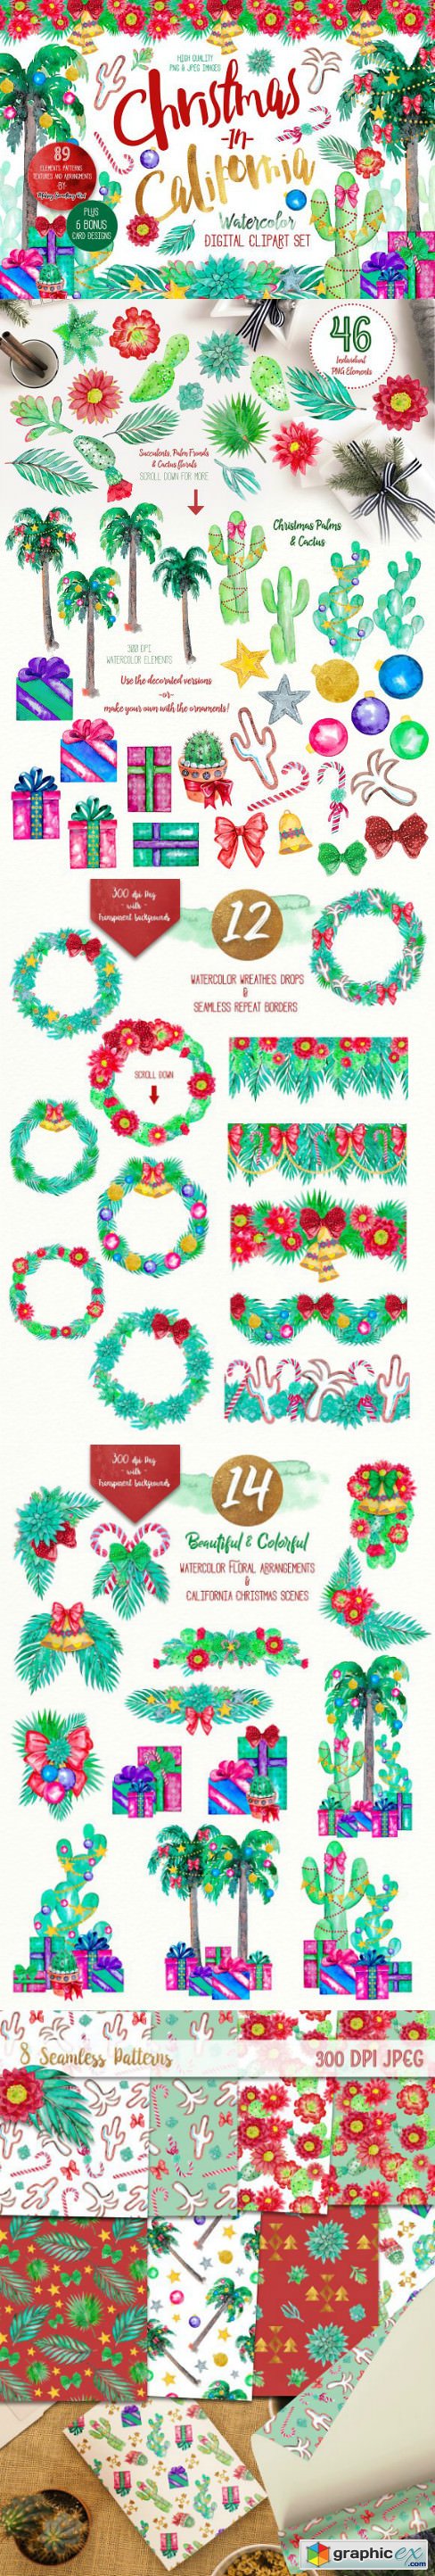 Christmas in California clipart set